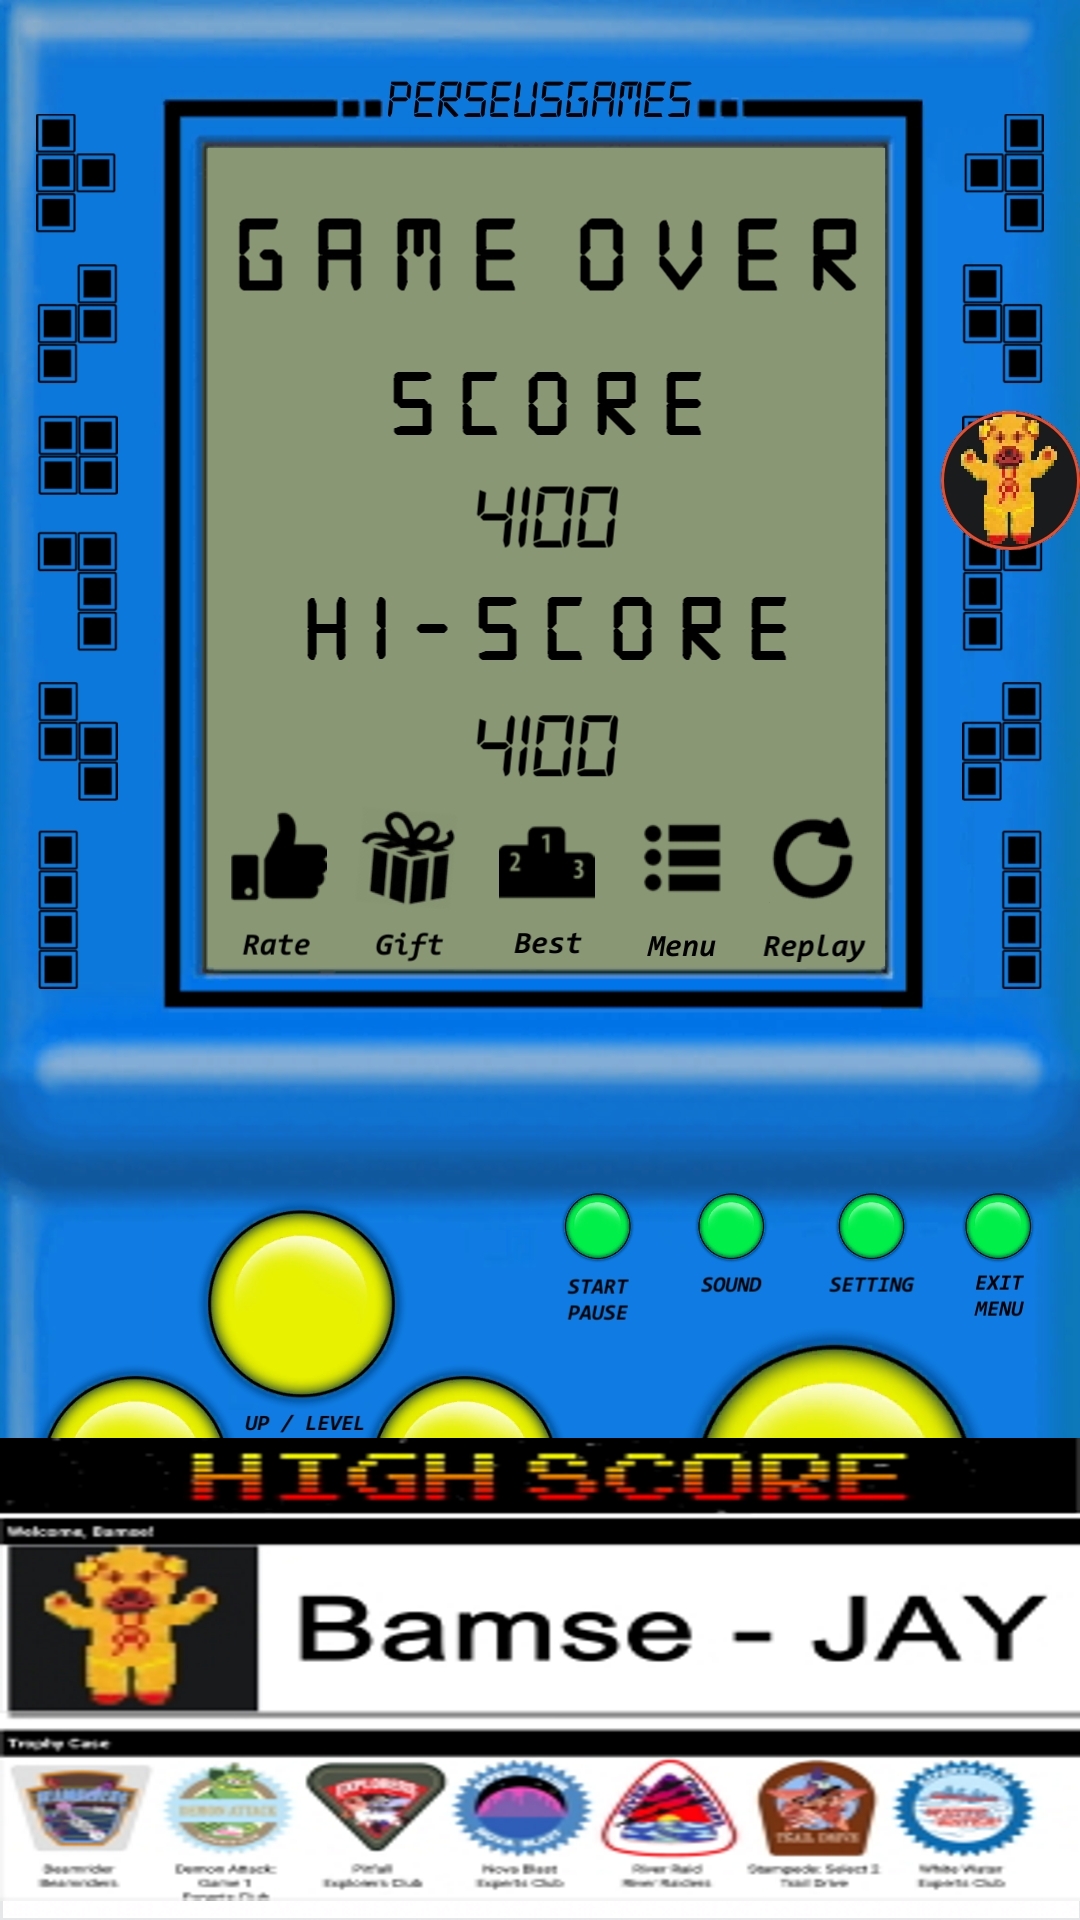 High score evidence submitted by Bamse